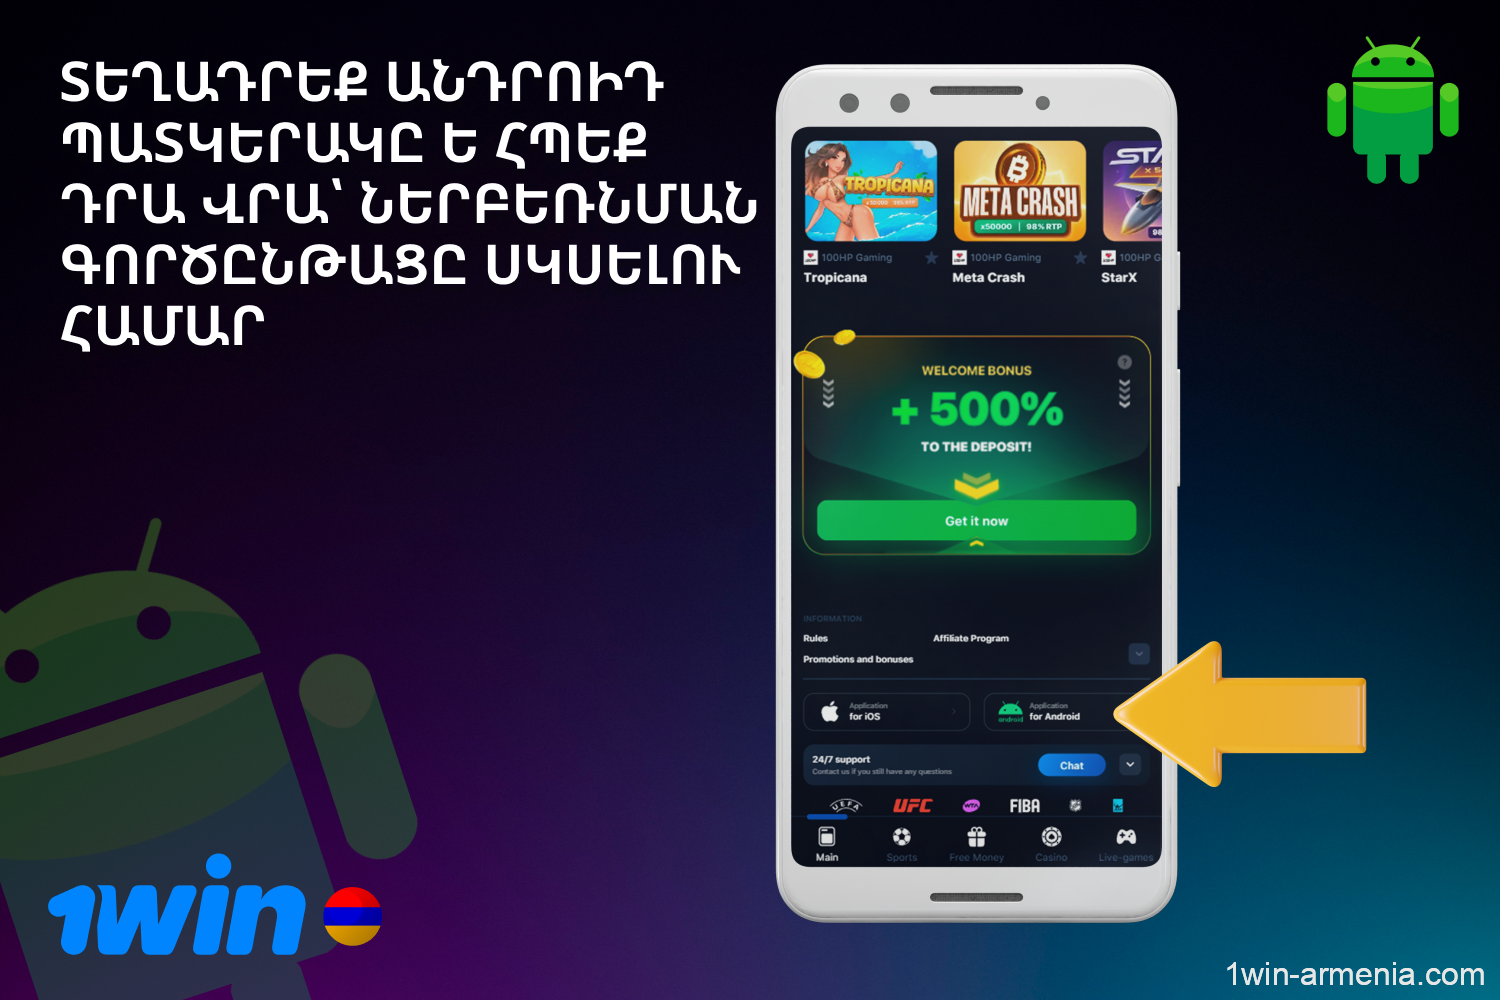 Find the Android icon and click on it to start the 1win APK download process